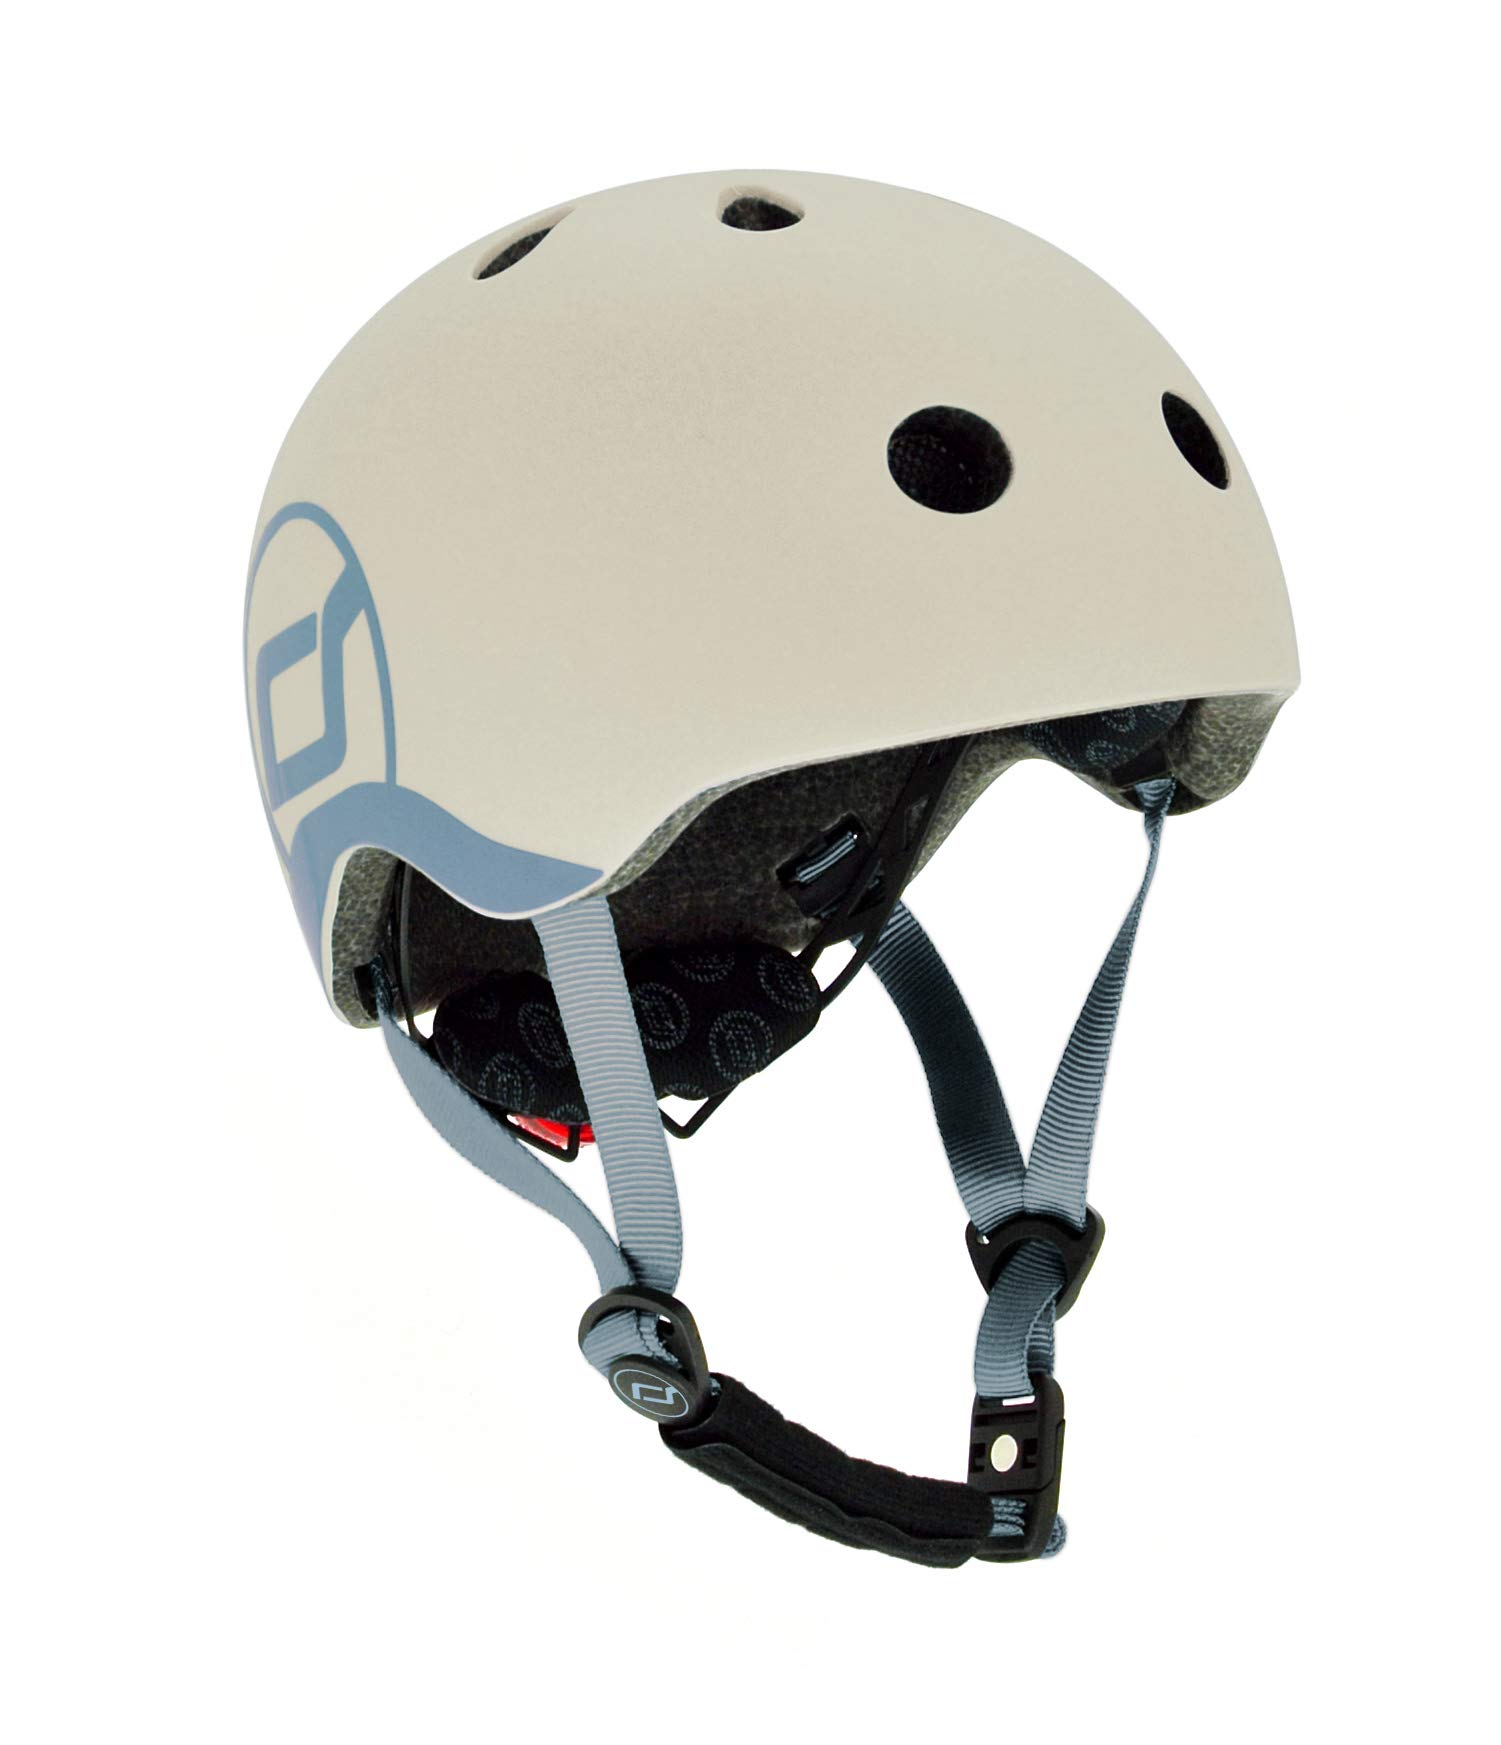 Scoot & Ride Scoot and Ride - Matte Finish Baby Helmet with Adjustable Straps (Ash, XXS-Small) - Includes LED Safety Light and Soft Fleece Pa